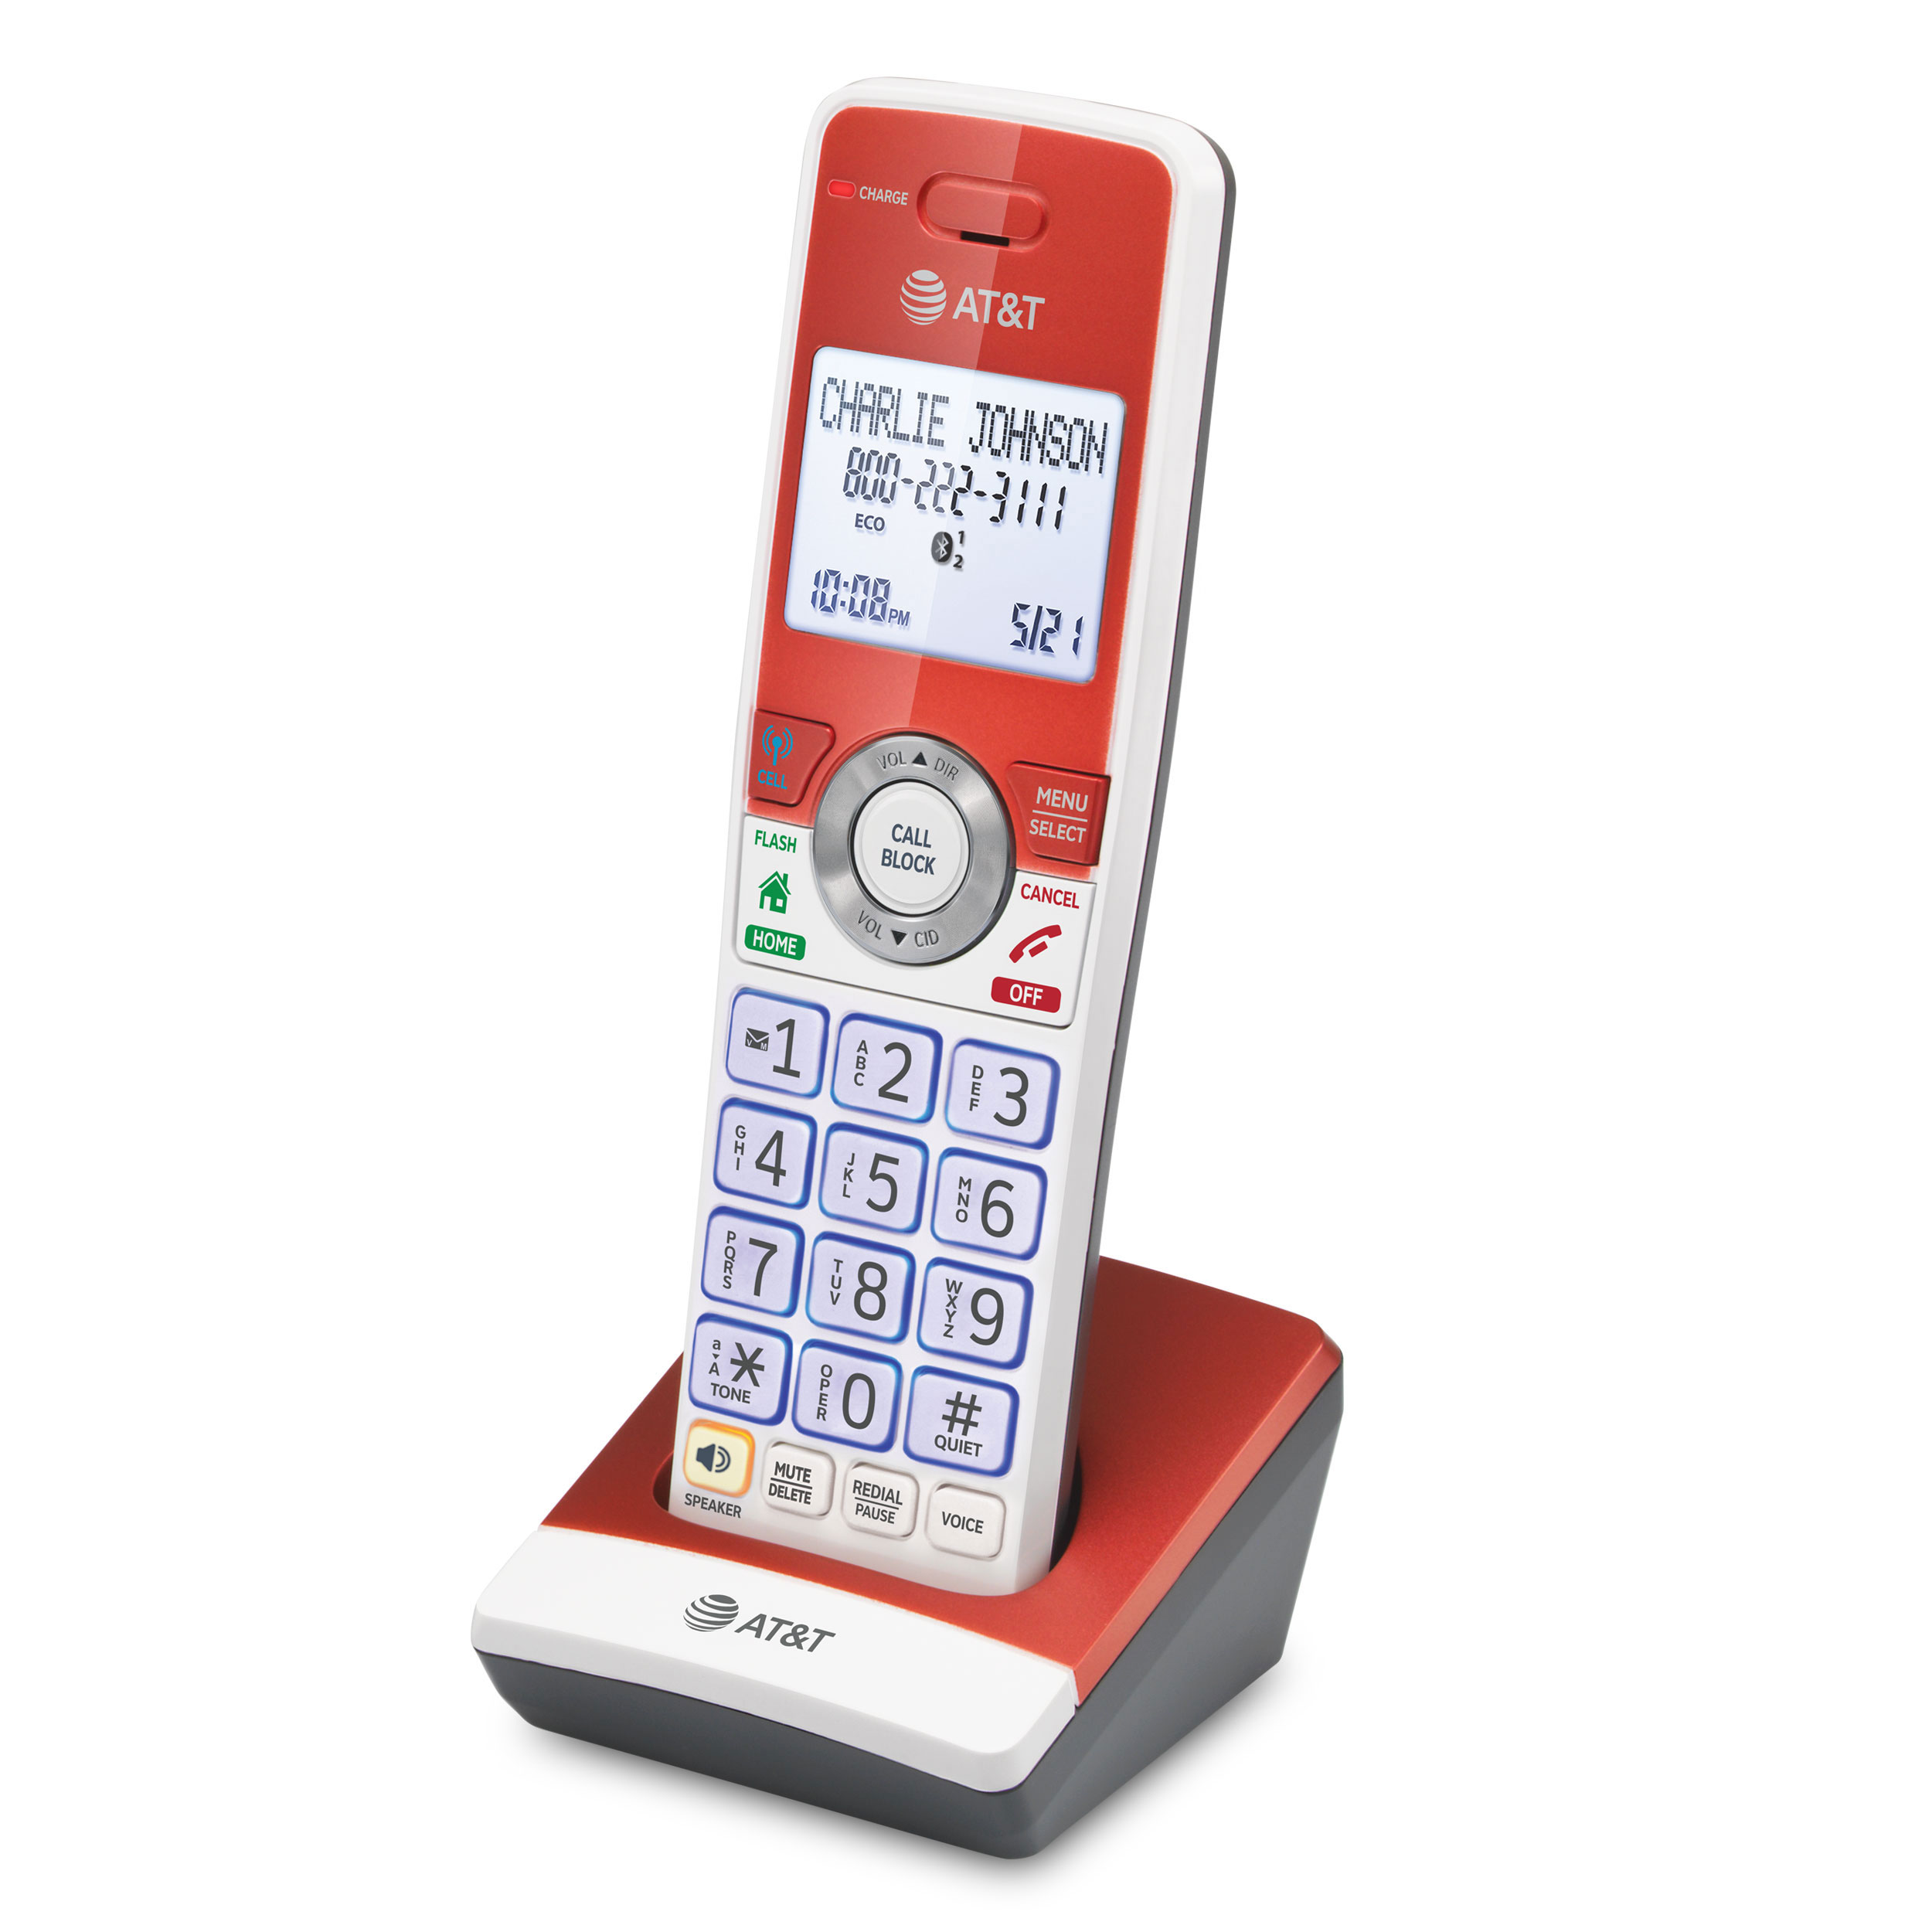 3-Handset Expandable Cordless Phone with Unsurpassed Range, Bluetooth Connect to Cell™, Smart Call Blocker and Answering System - view 5